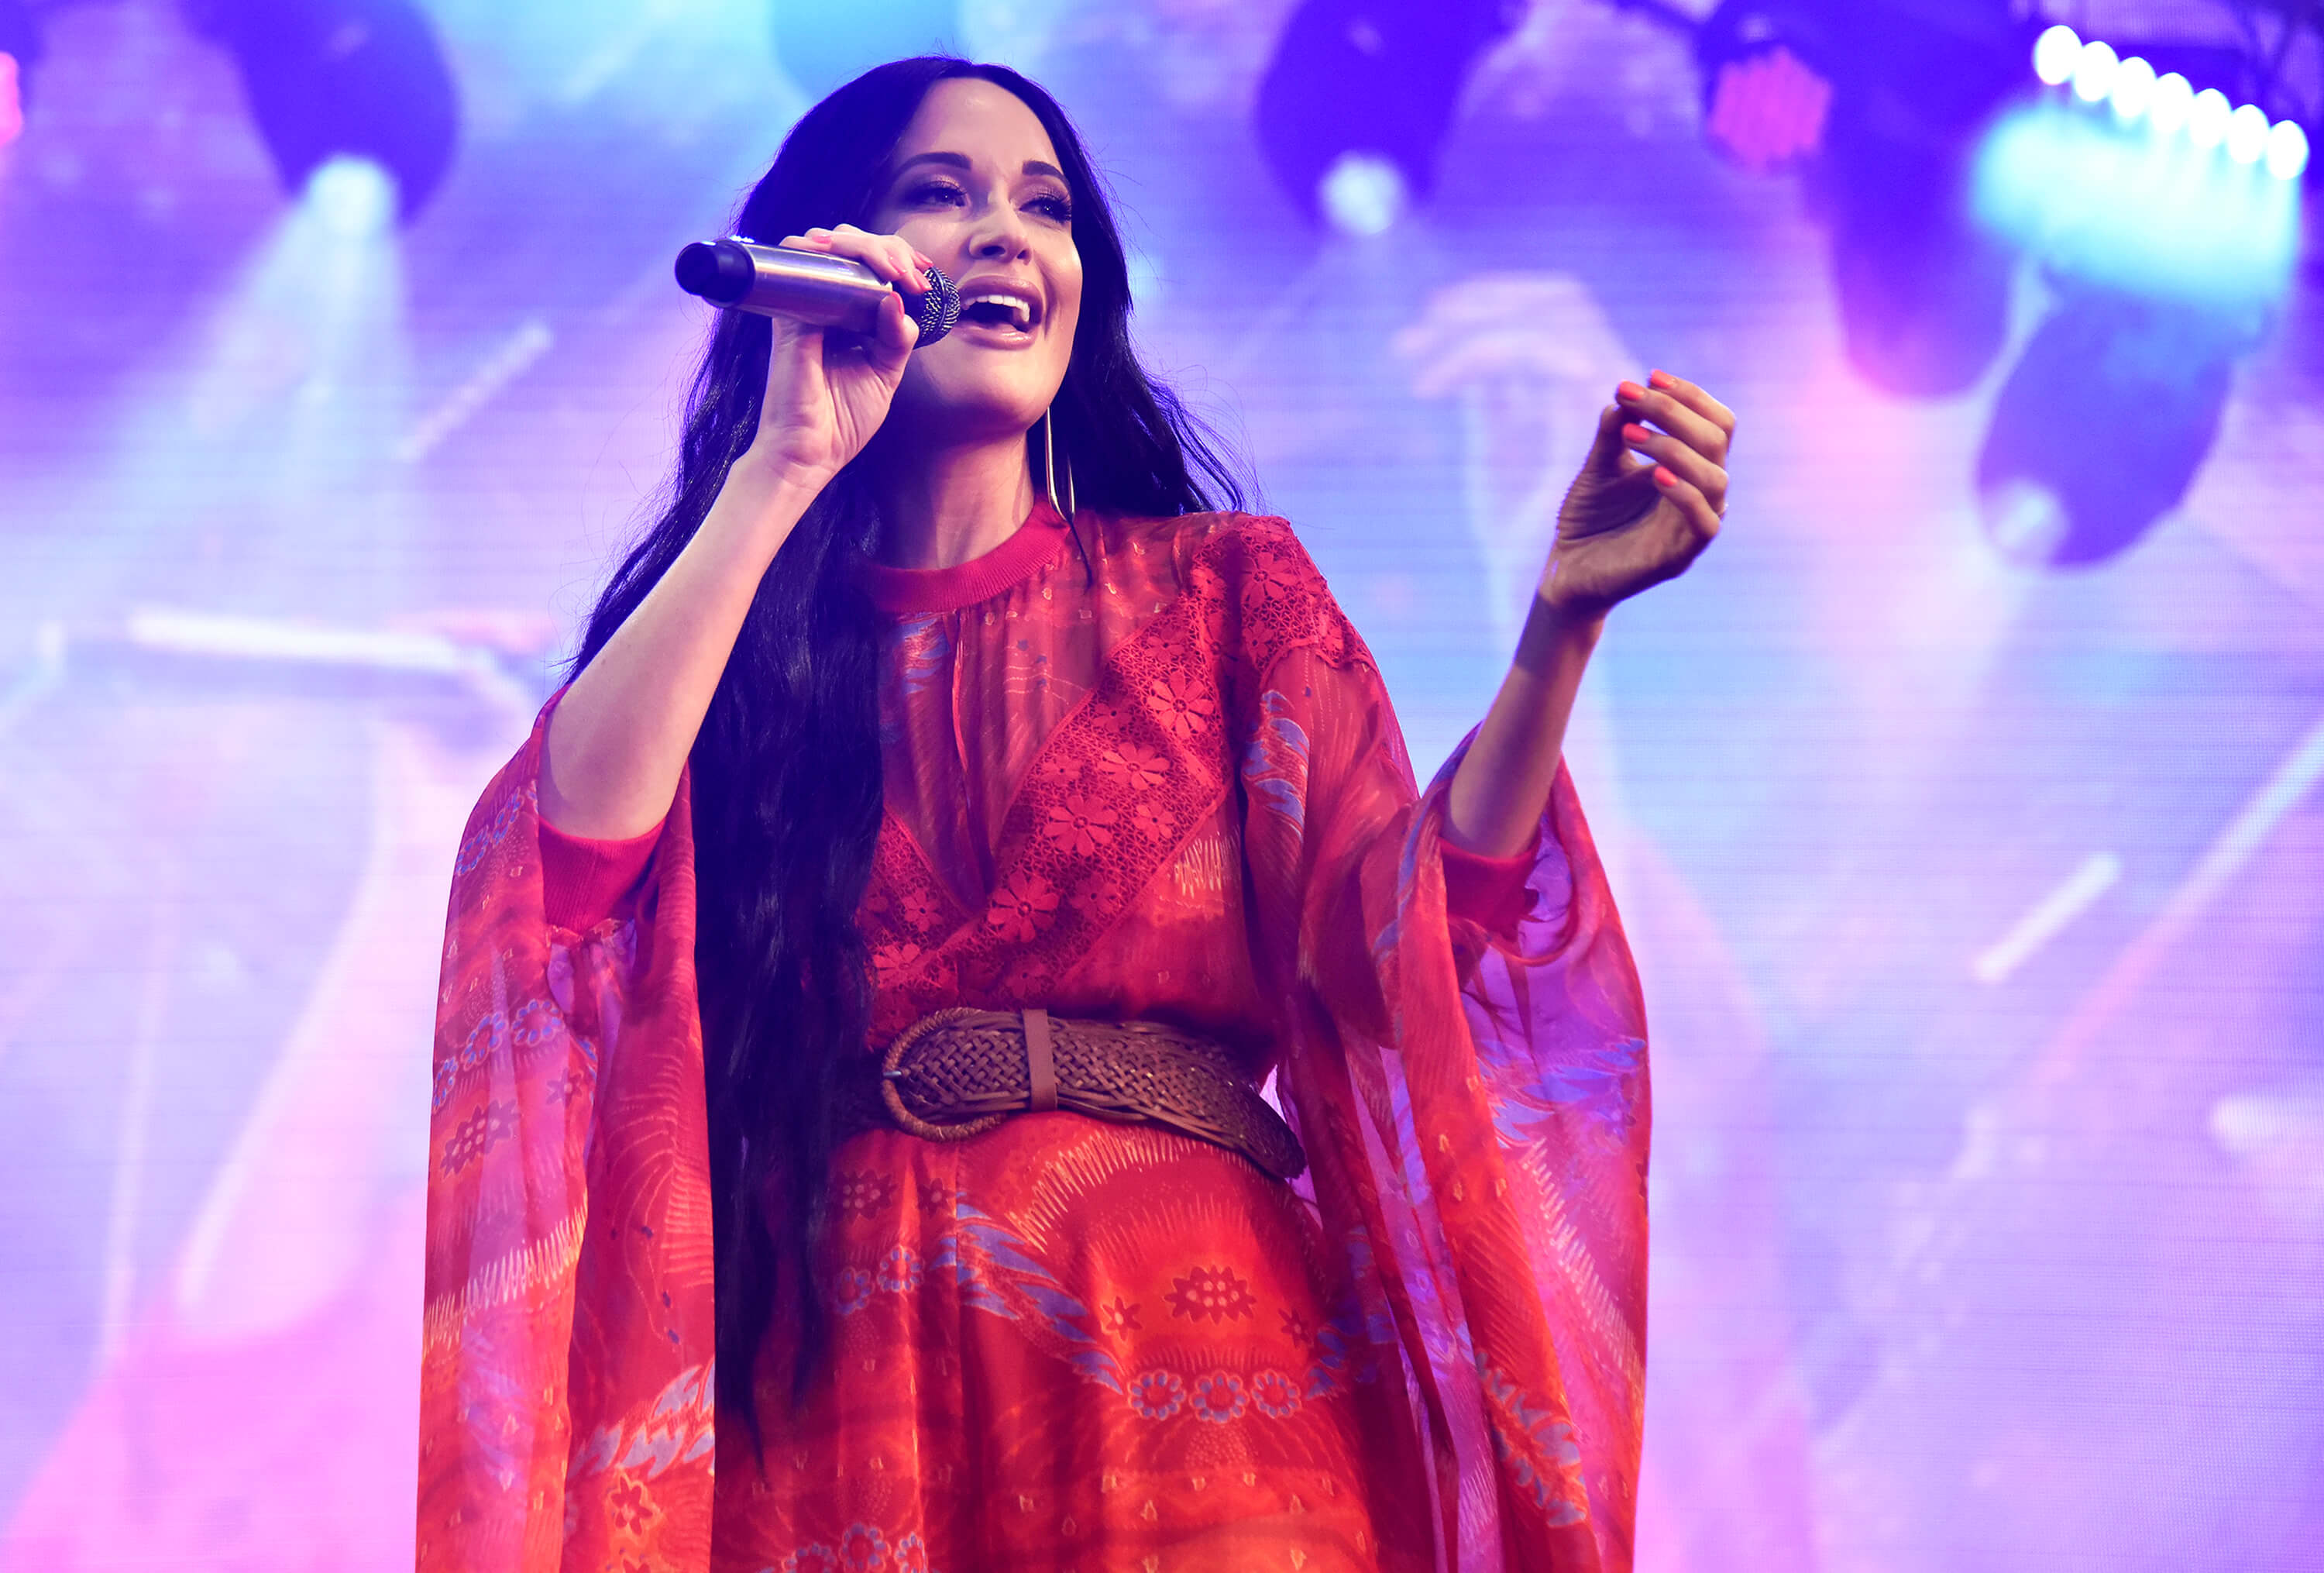 acey Musgraves performs during the 2019 Bonnaroo Music & Arts Festival